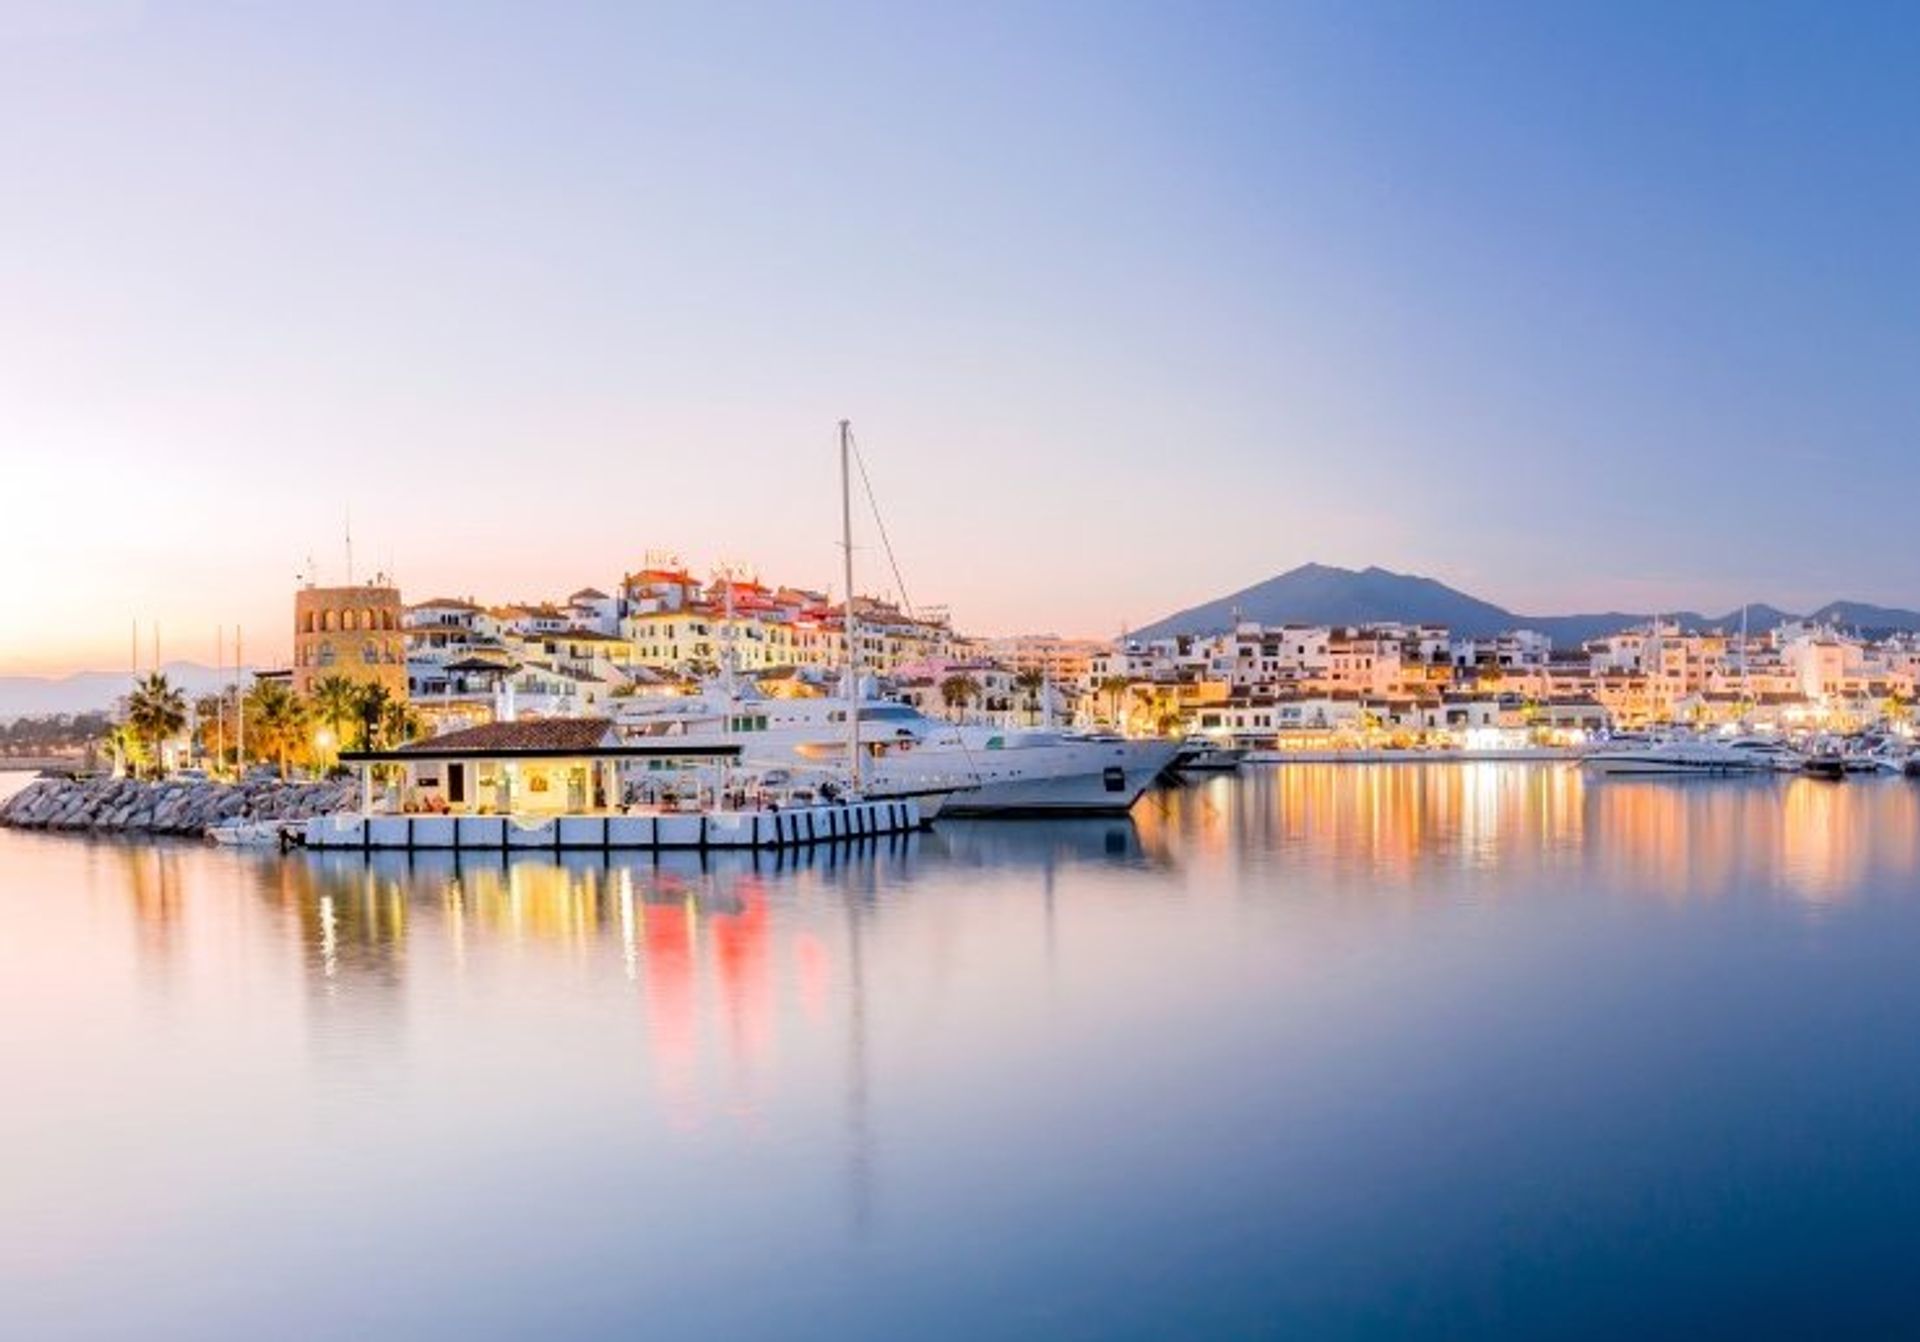 For a night of dancing, energetic crowds and a cosmopolitan atmosphere, head to Marbella's Puerto Banus